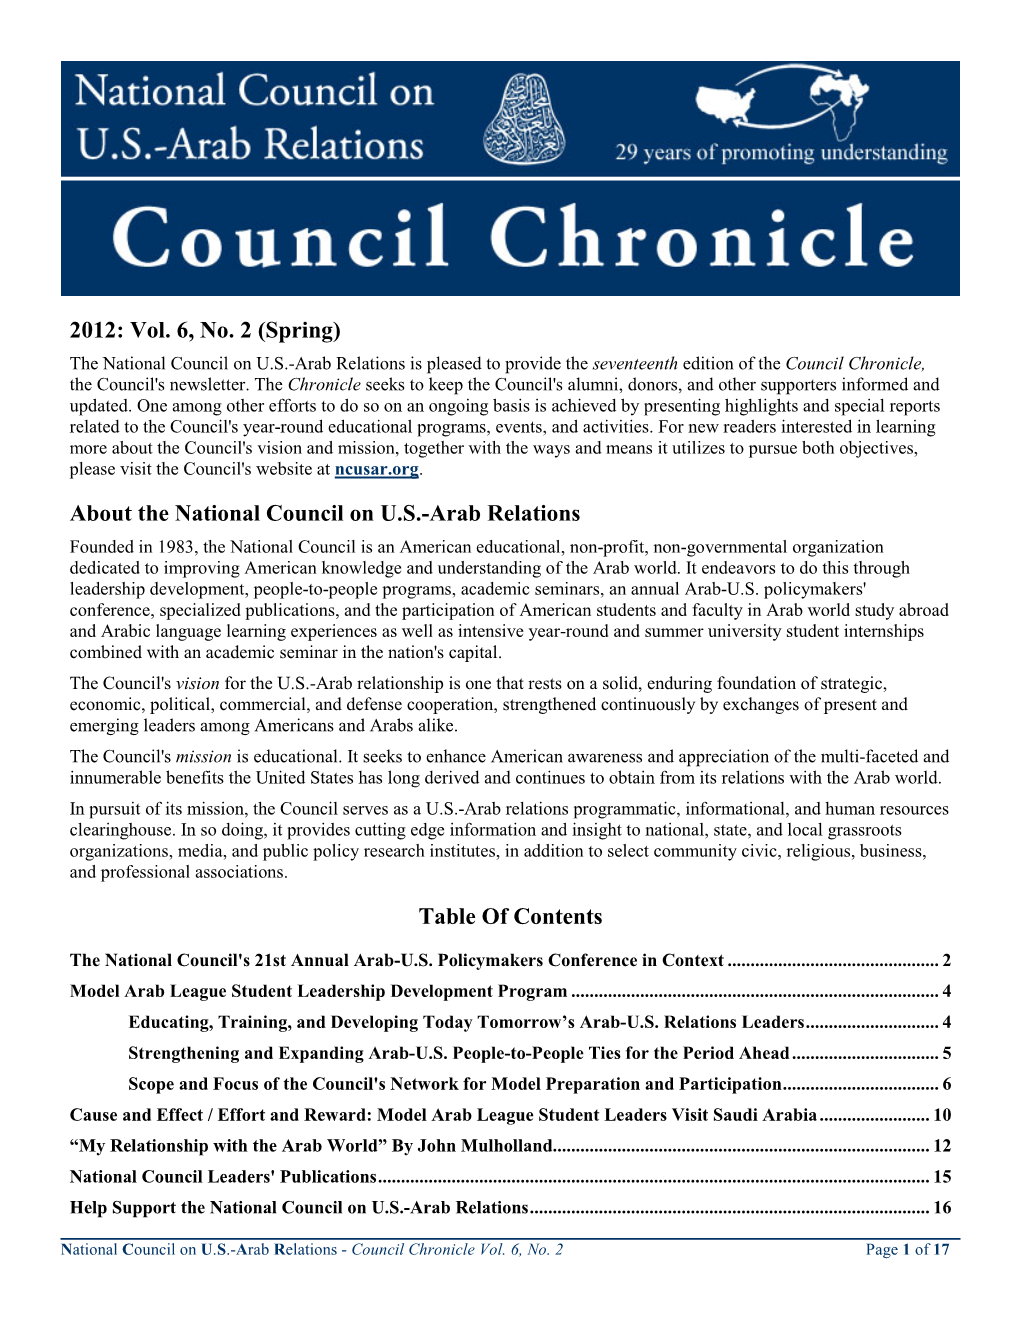 Council Chronicle, the Council's Newsletter